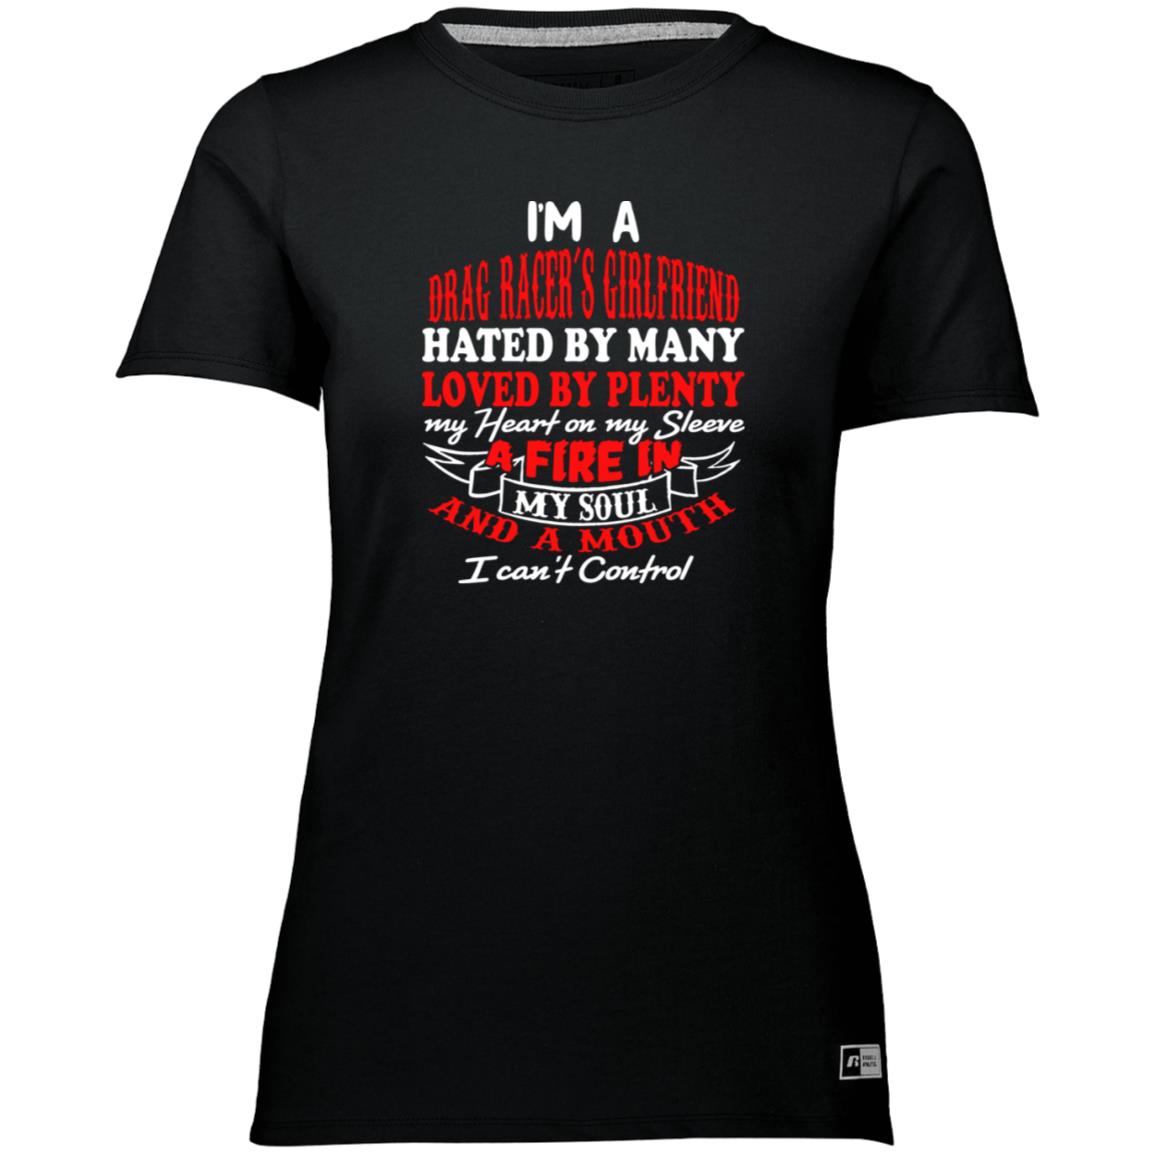 I'm A Drag Racer's Girlfriend Hated By Many Loved By Plenty Ladies’ Essential Dri-Power Tee